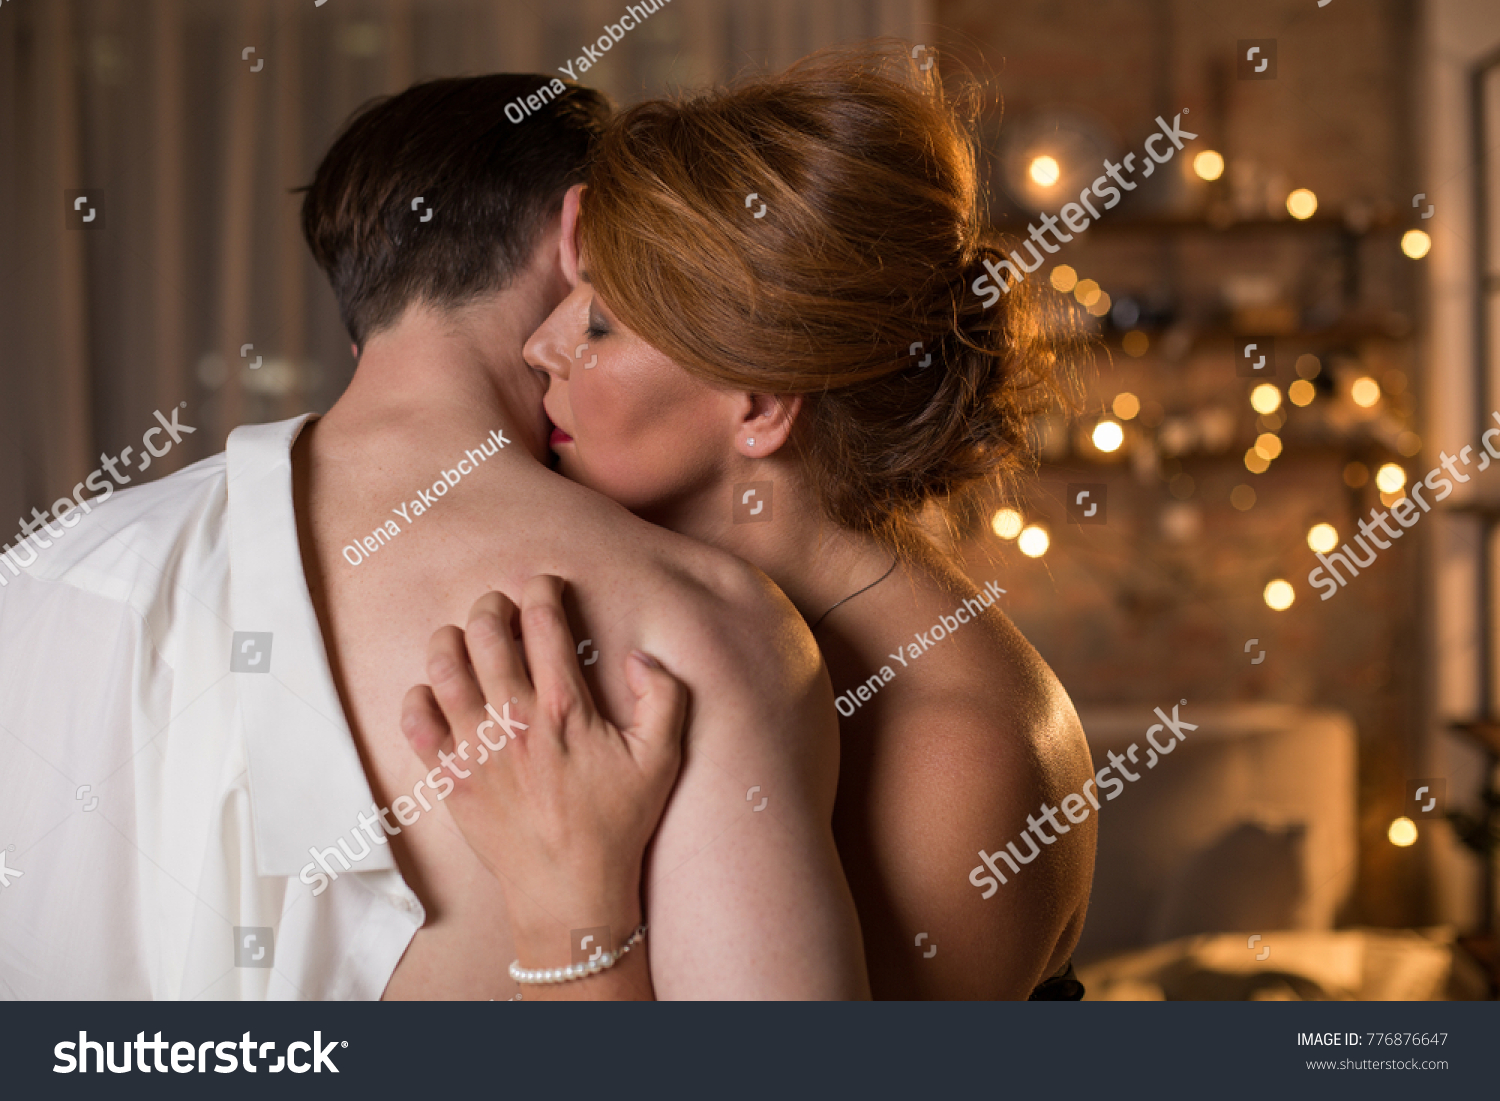 Affectionate loving couple is embracing with desire. Woman is kissing male neck with temptation while nailing into man nude back. Prelude concept #776876647